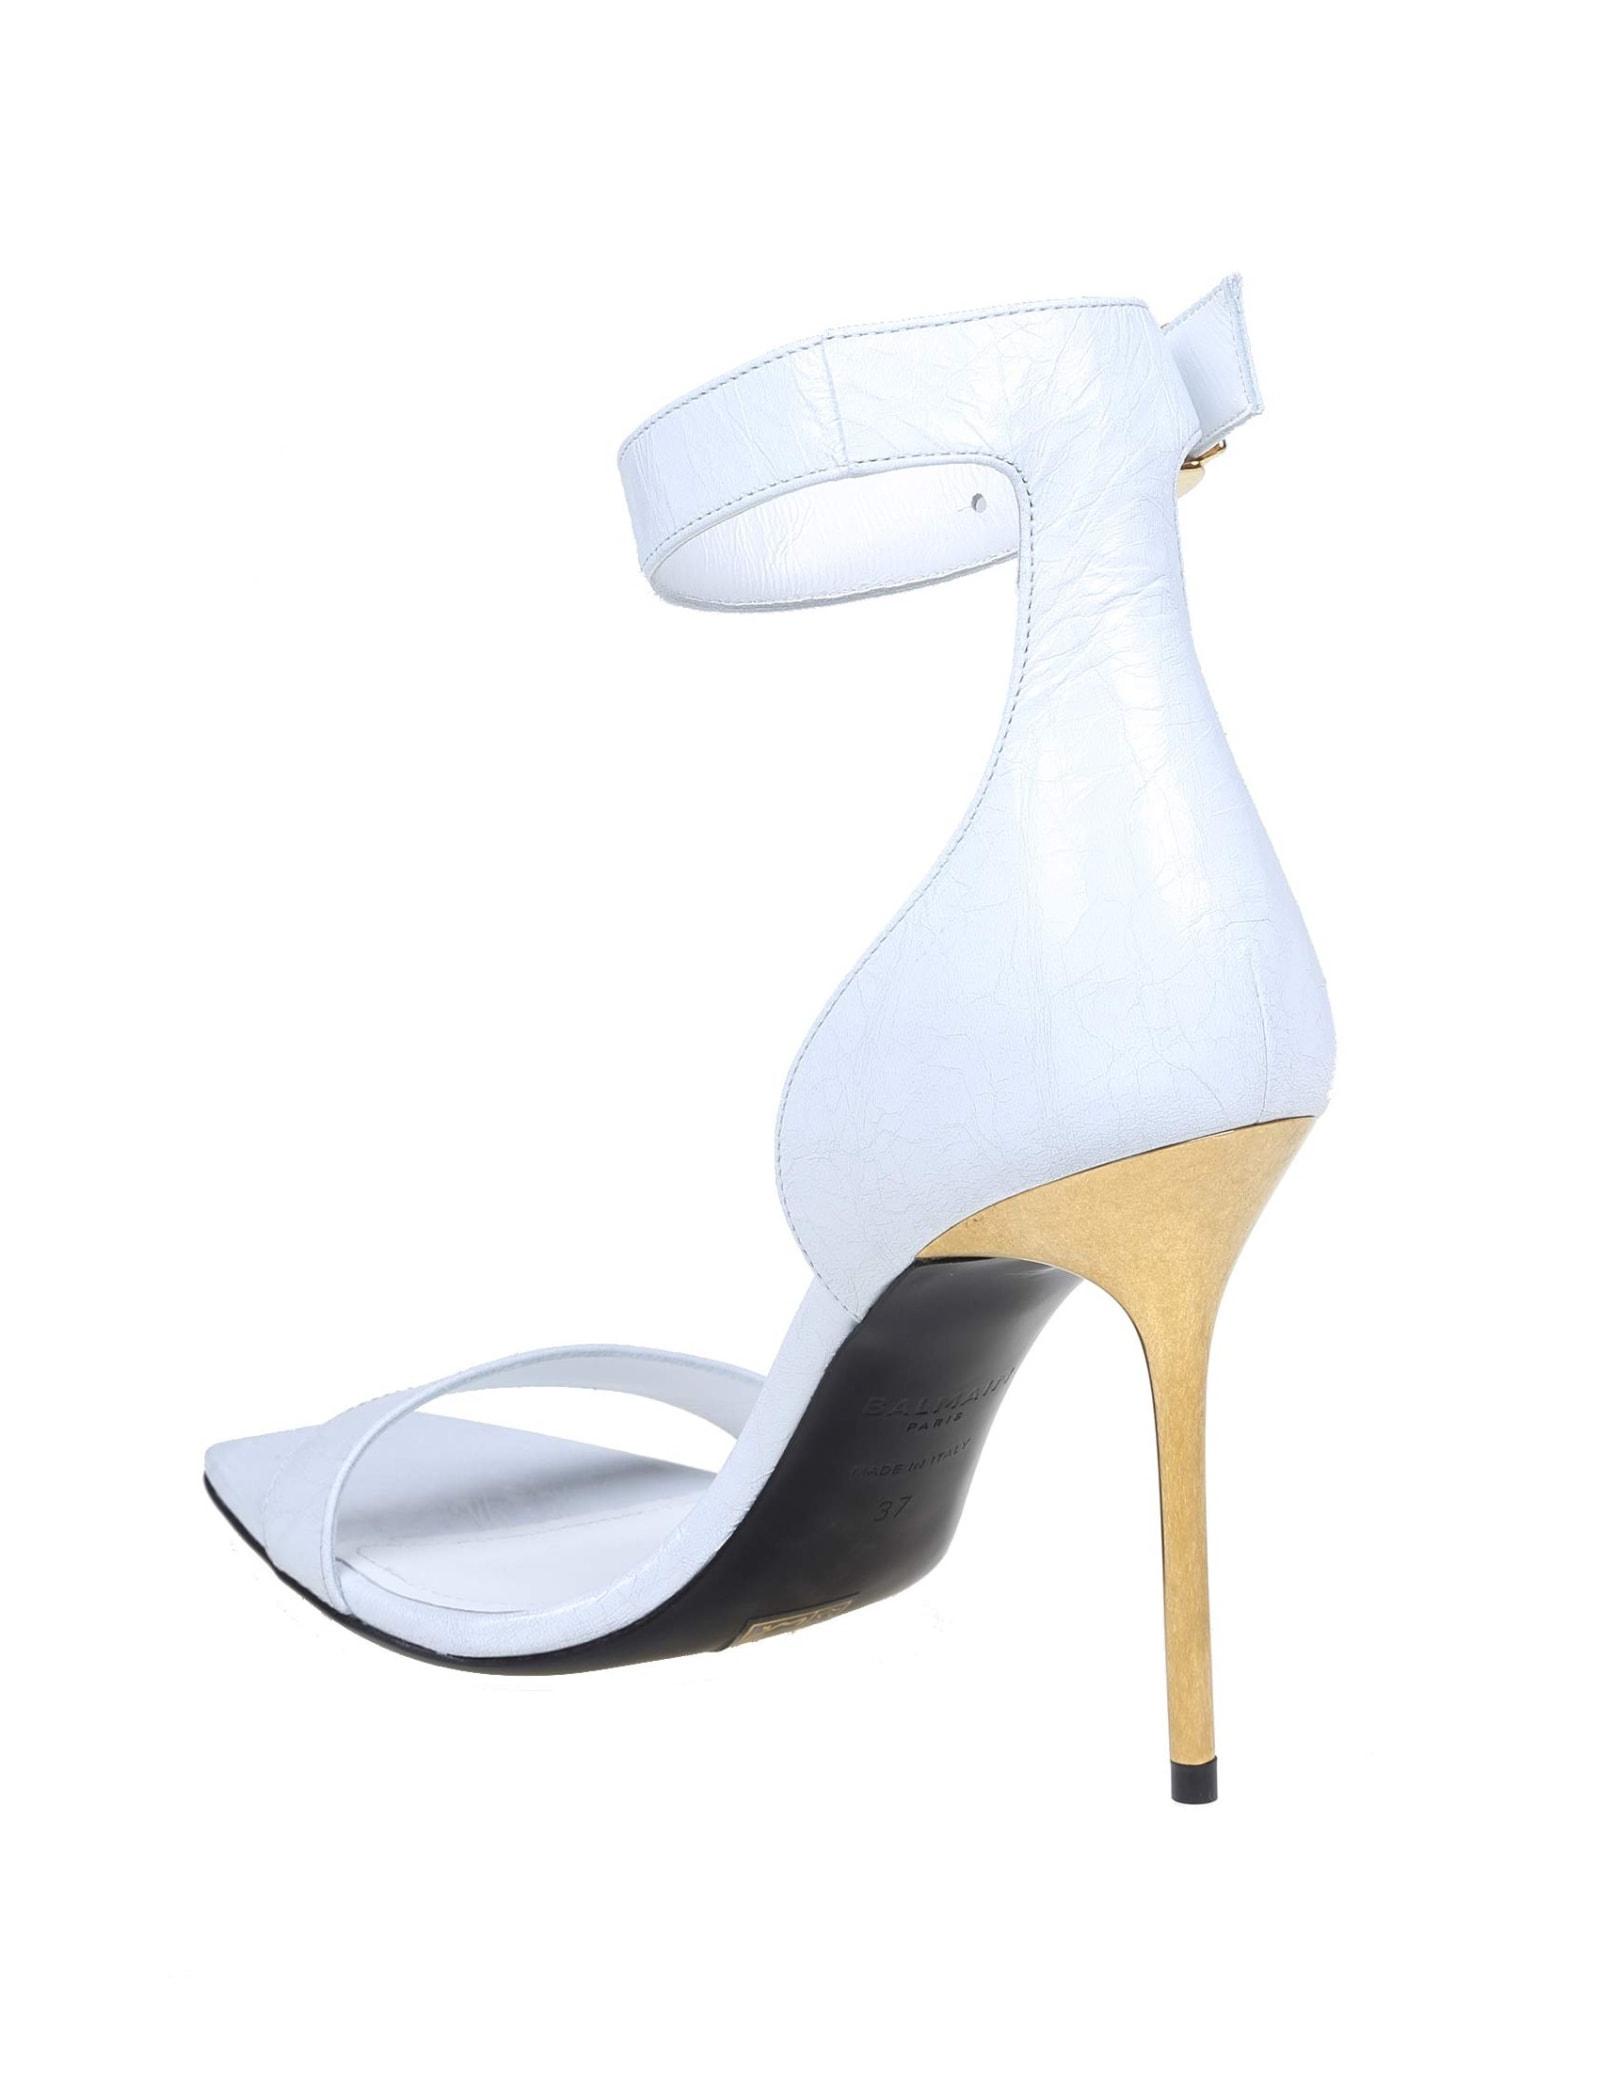 Balmain Uma Sandals In Leather in White Womens Shoes Heels Sandal heels Save 53% 